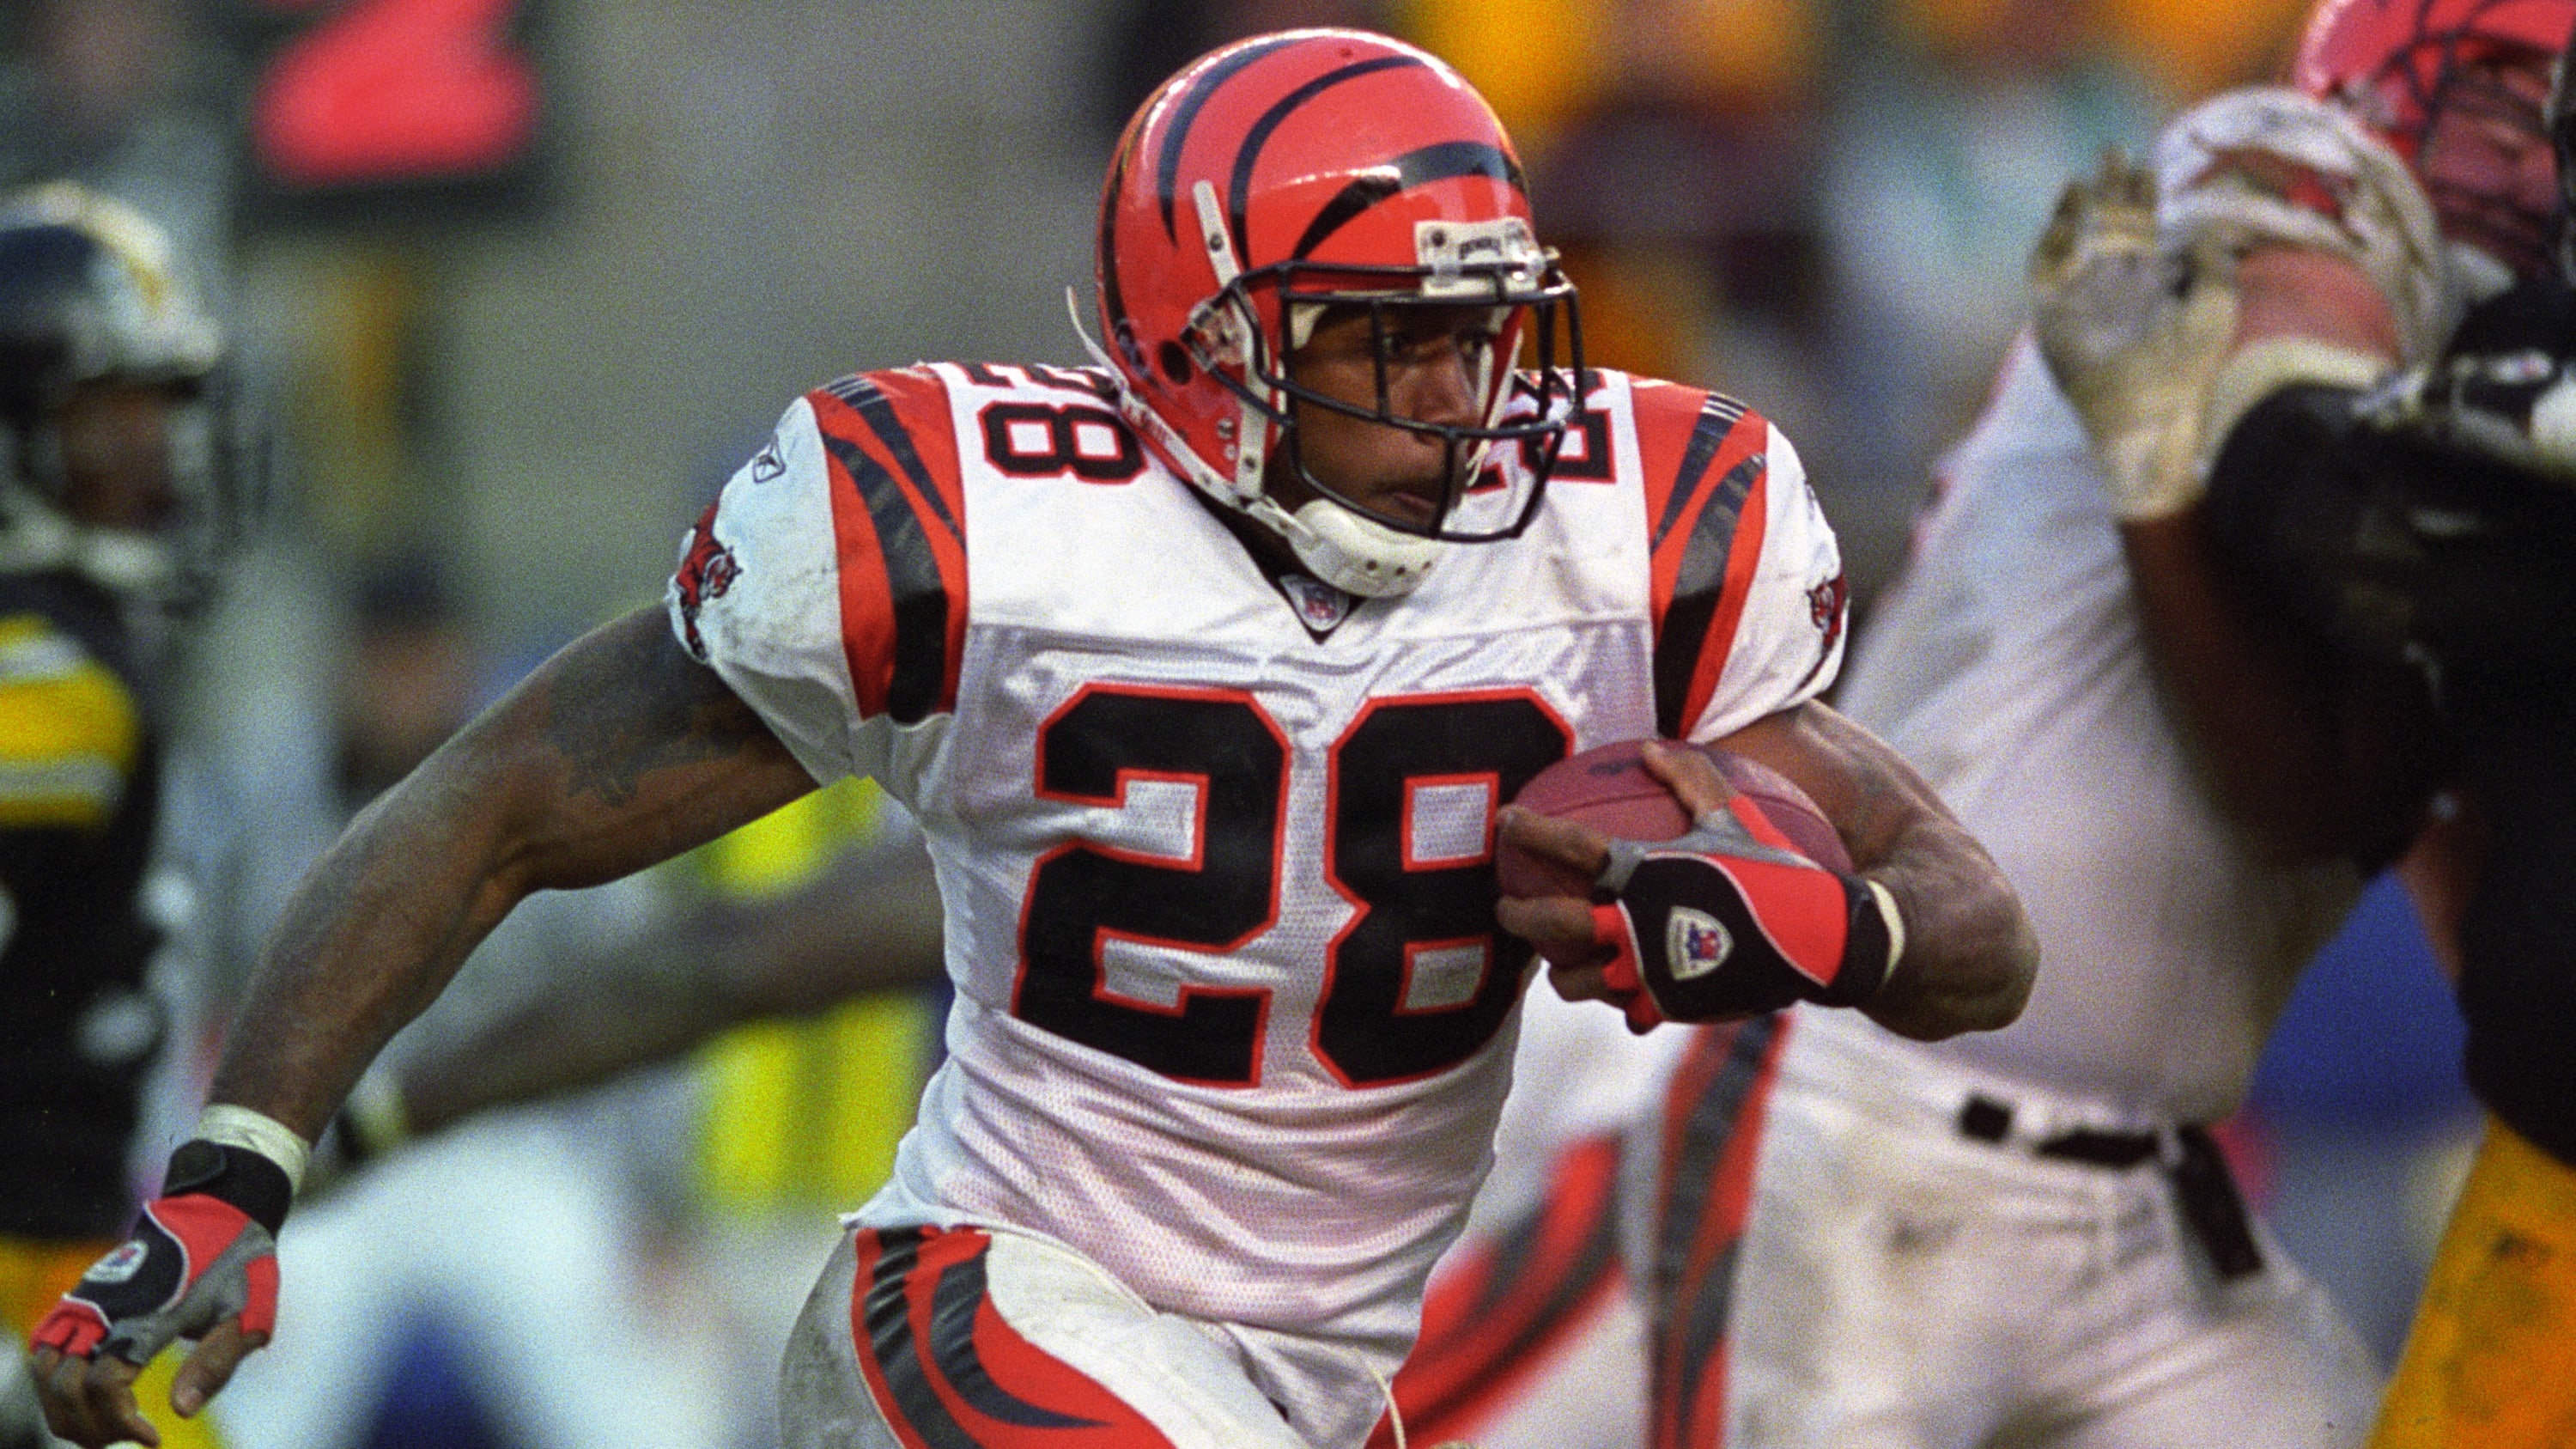 VIDEO: Remembering When Corey Dillon Scored the Longest Touchdown in Bengals History